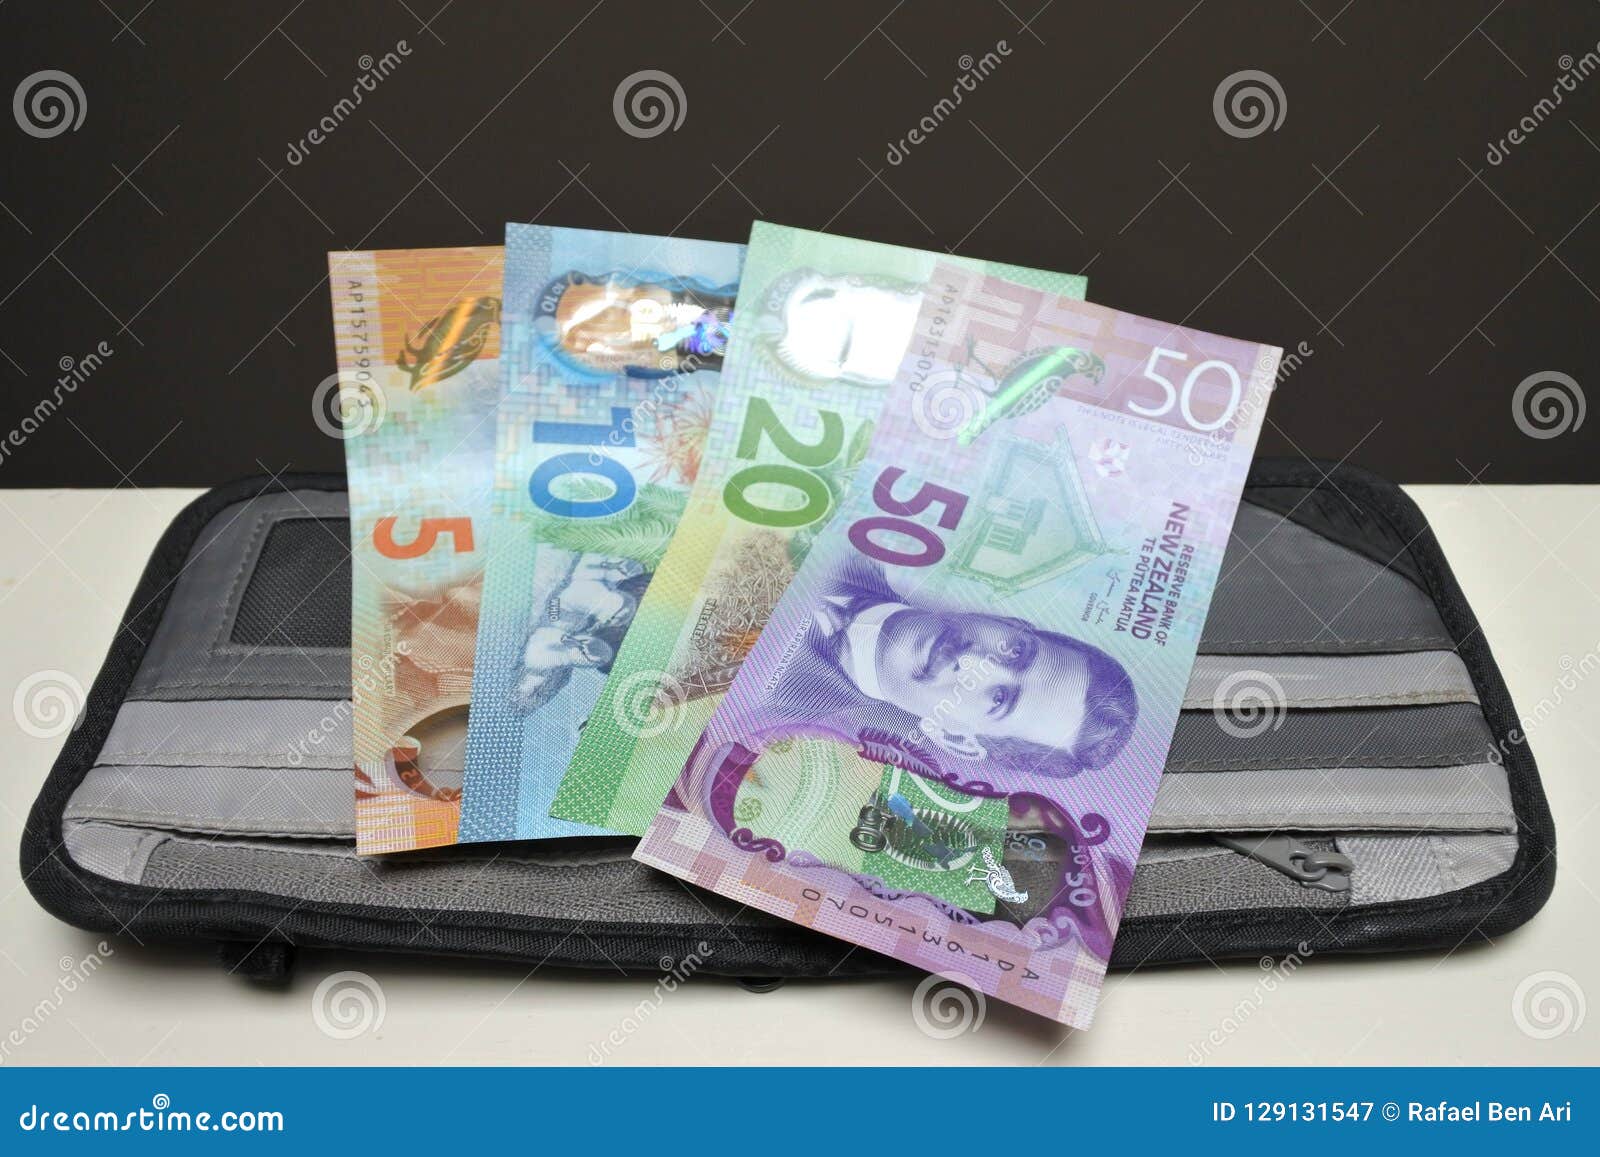 New Zealand Currency Notes On A Wallet Stock Image - Image of dimensional, success: 129131547